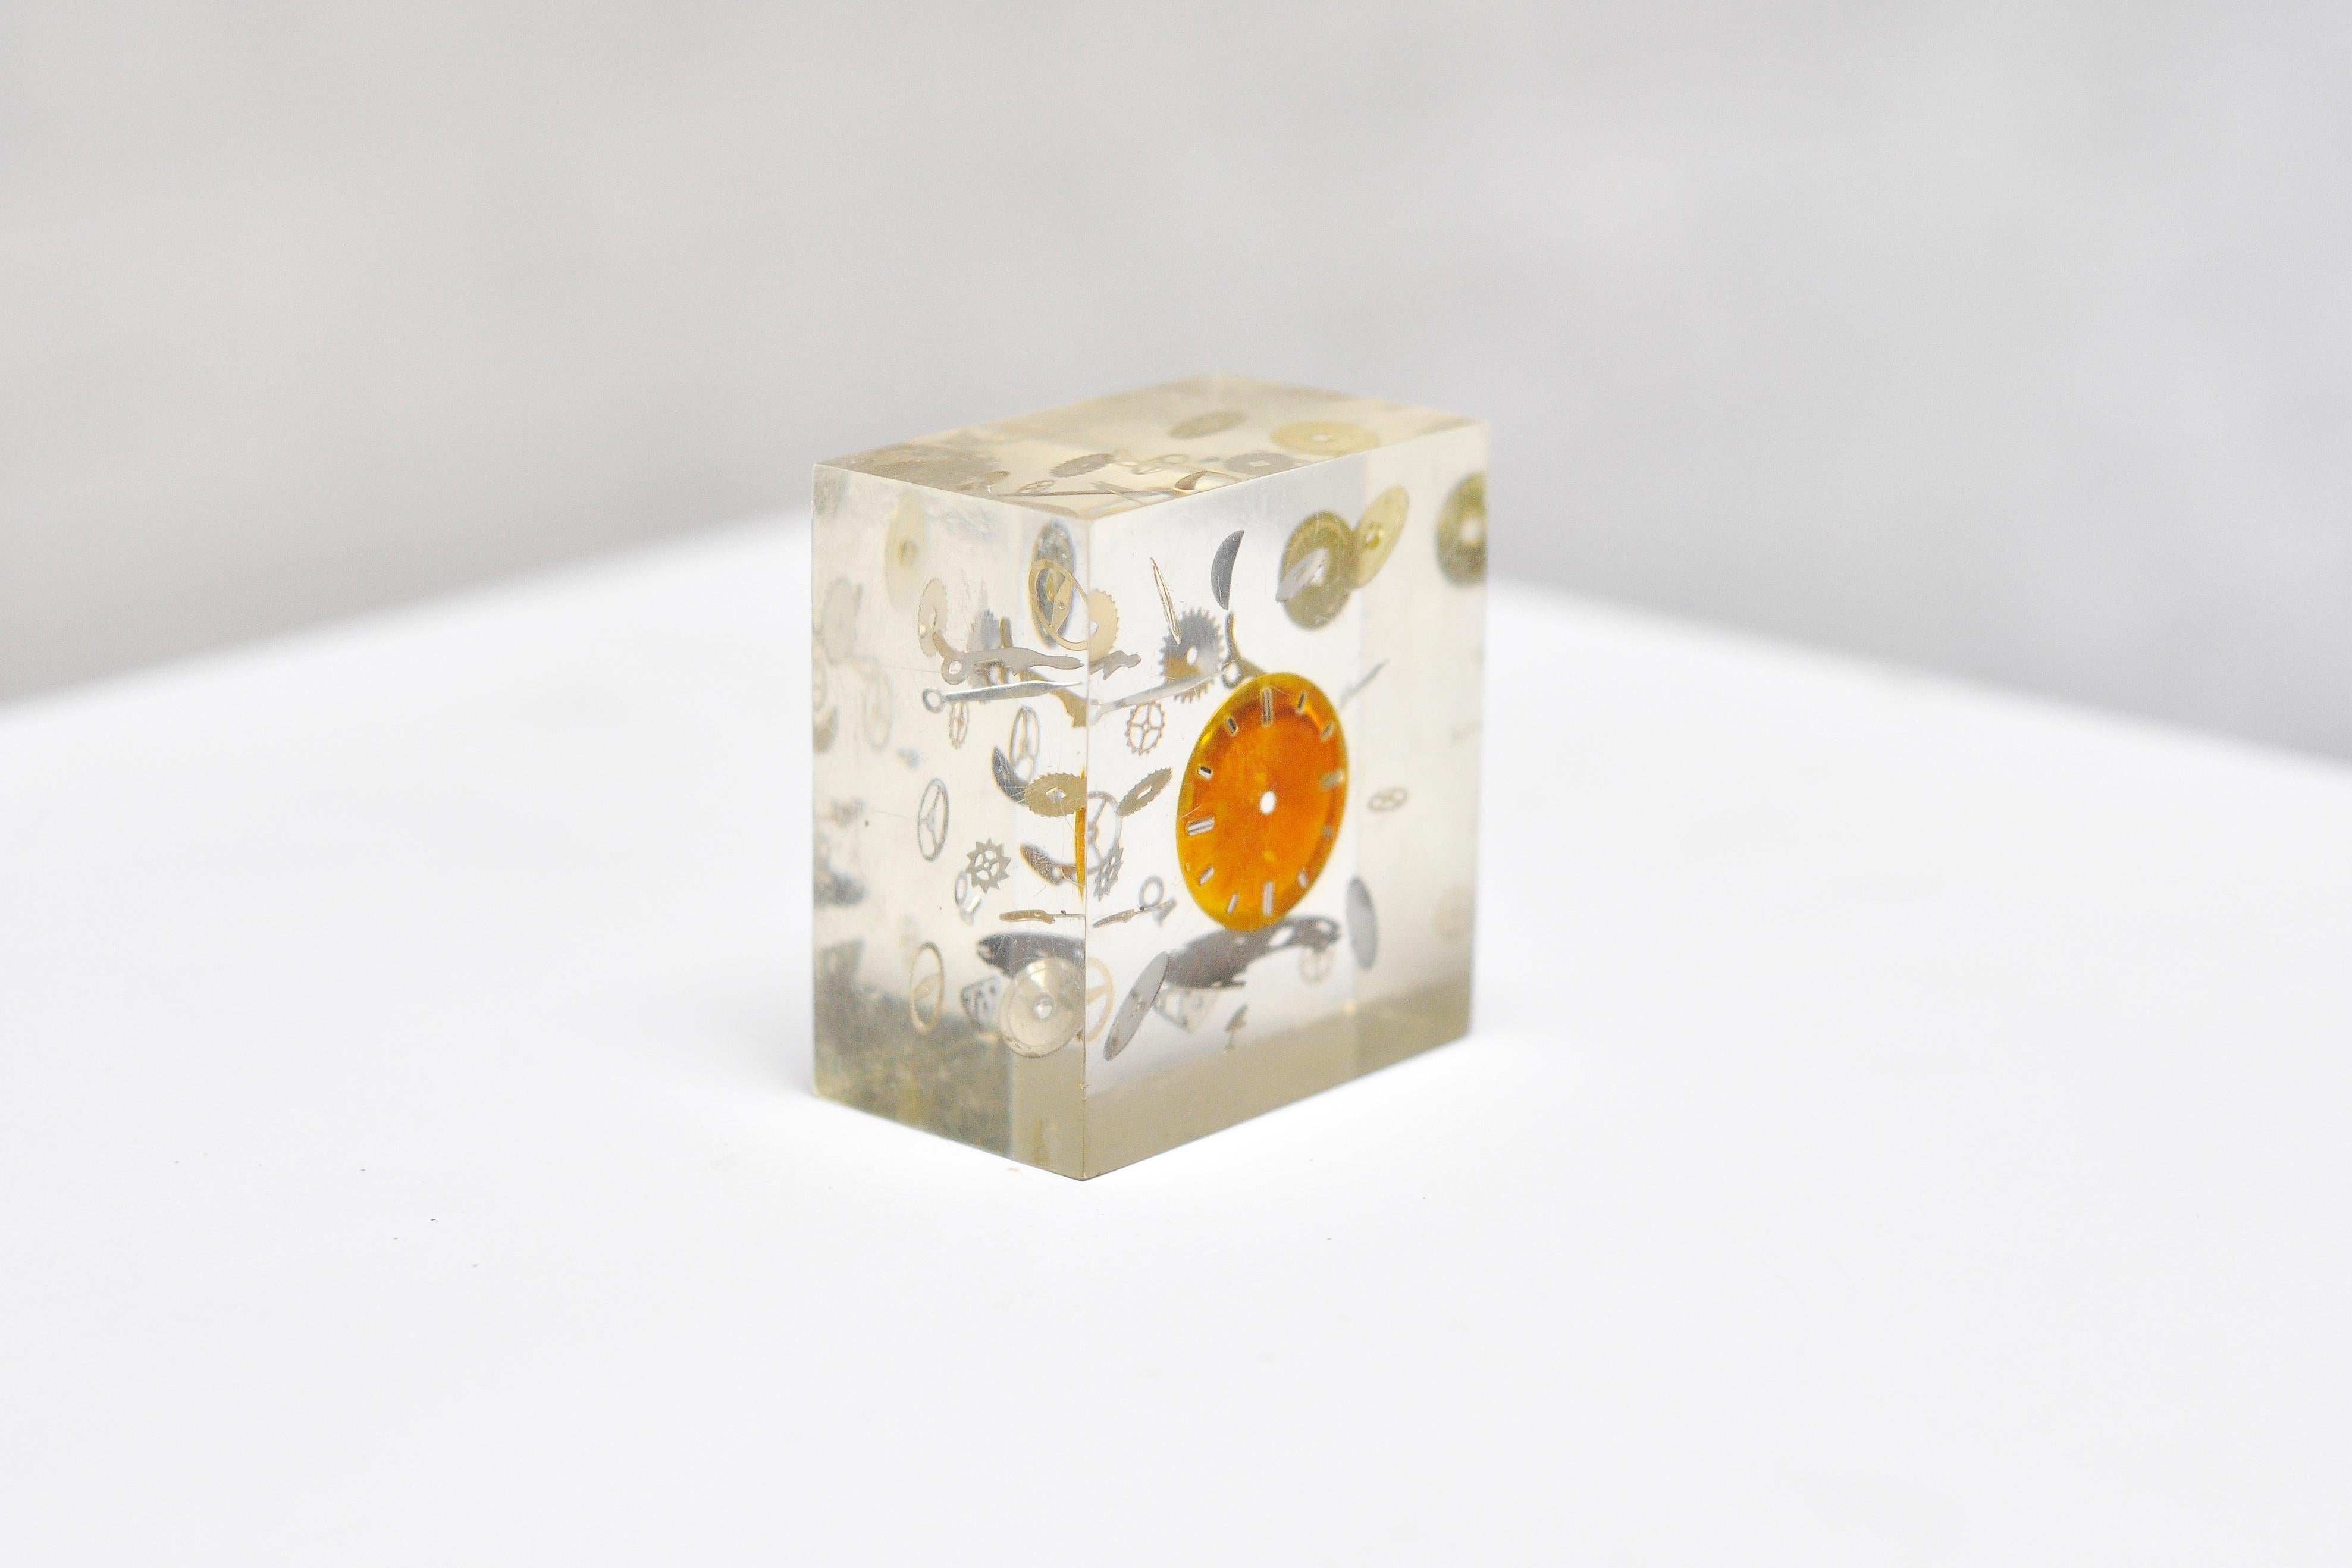 Mid-Century Modern Modernist Lucite Resin Sculpture with Exploded Clock by Pierre Giraudon, 1970's For Sale